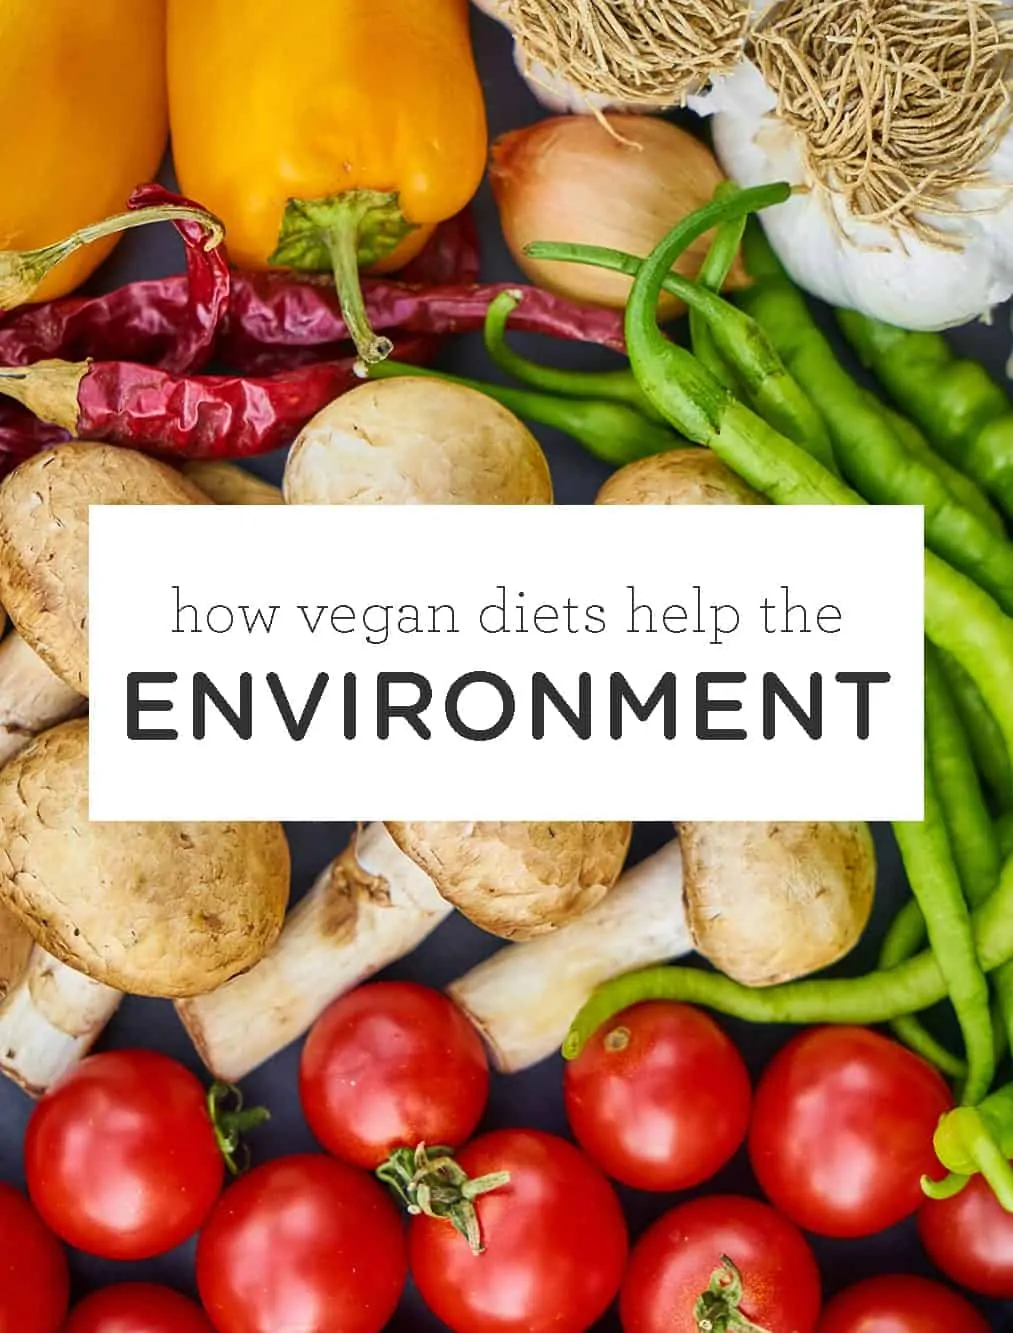 How Vegan Diets Help the Environment